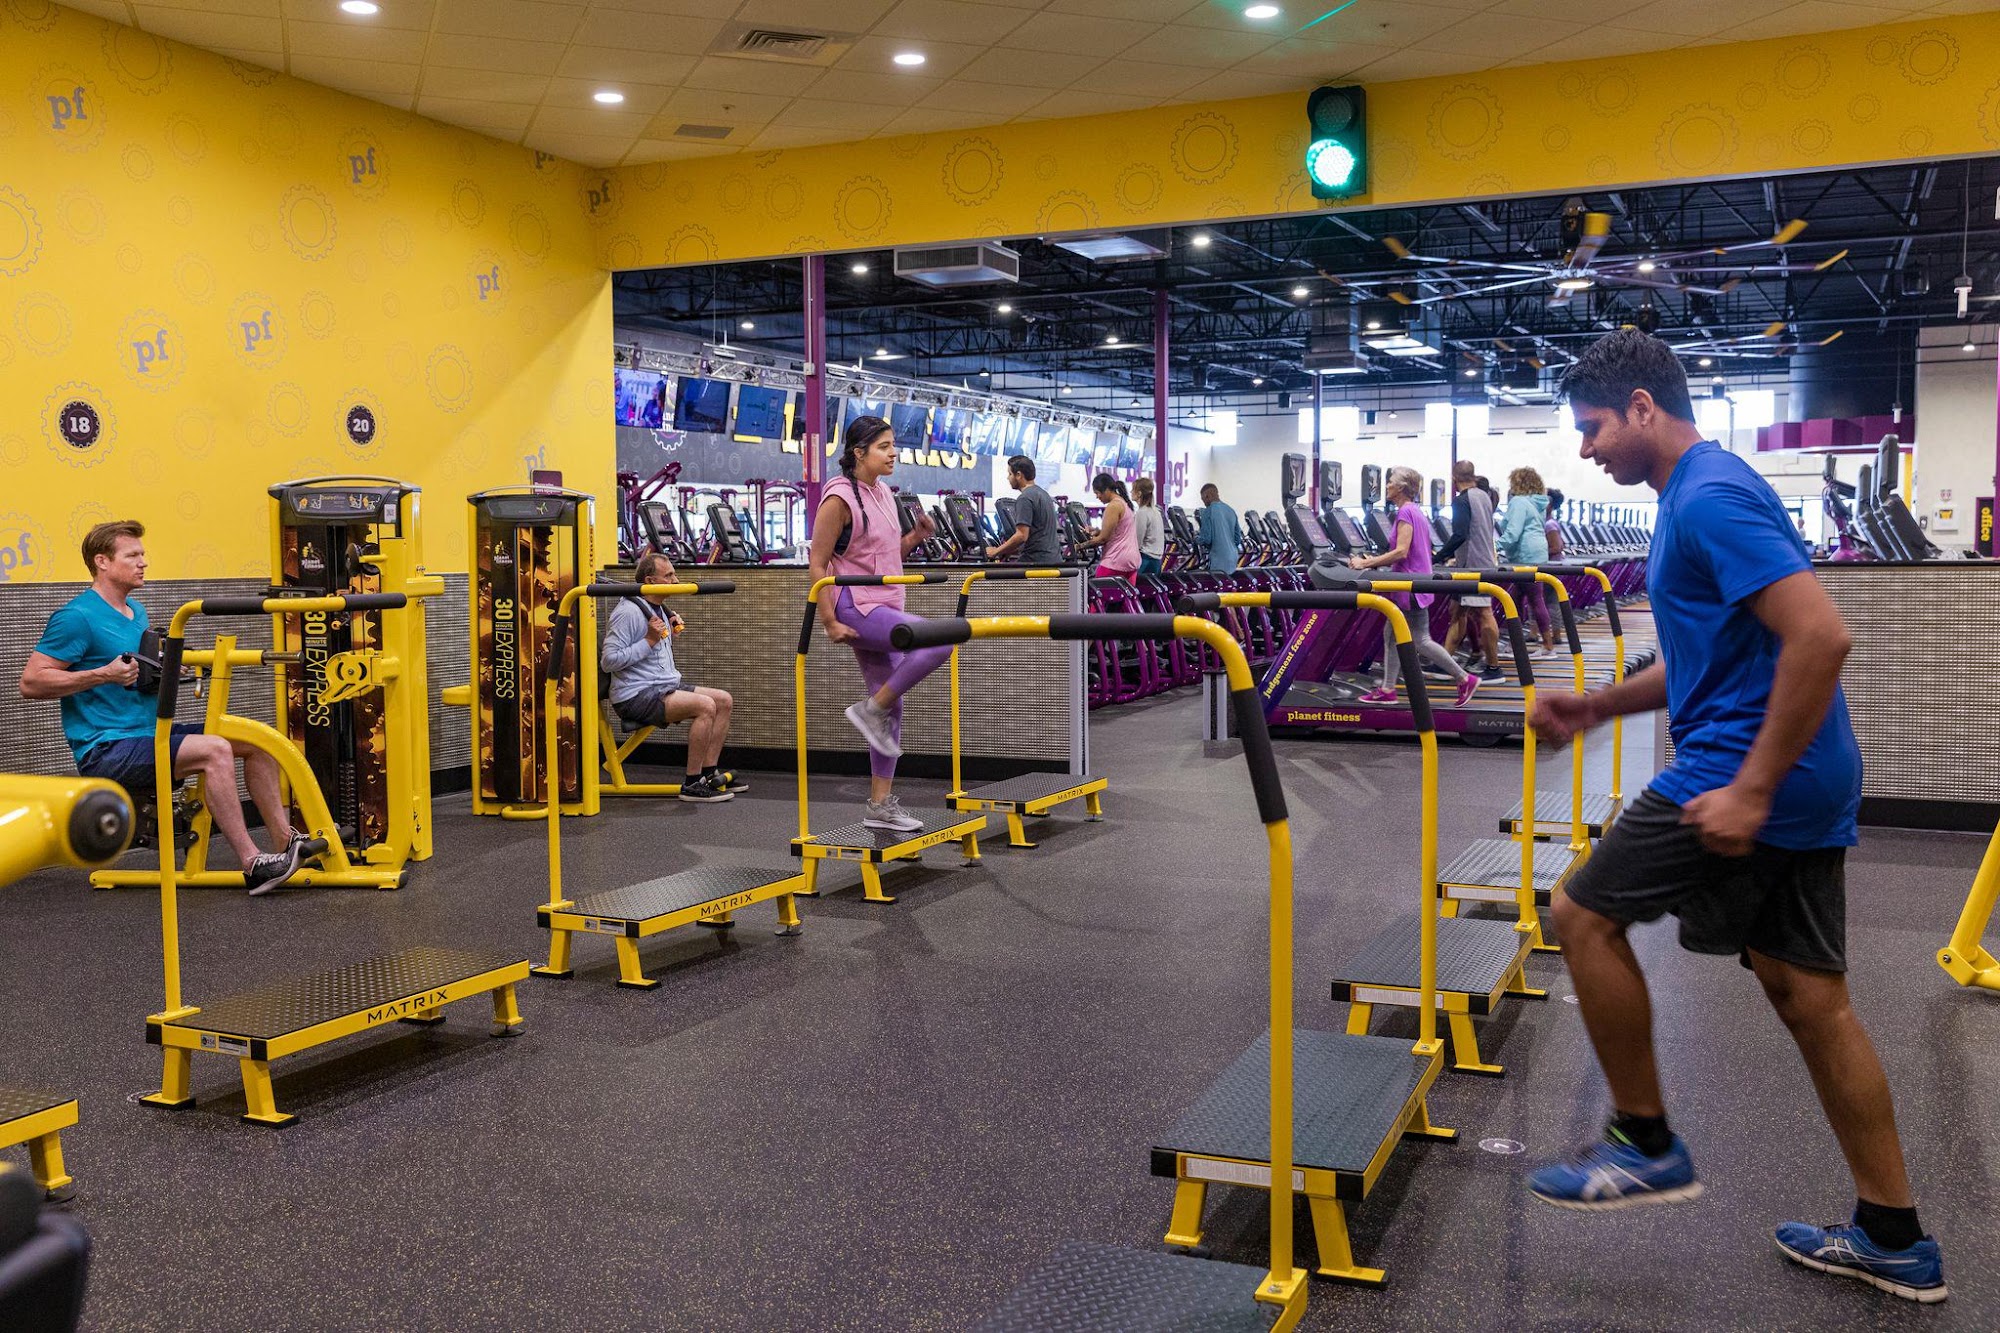 Planet Fitness 1315 Main St, Willimantic Connecticut 06226